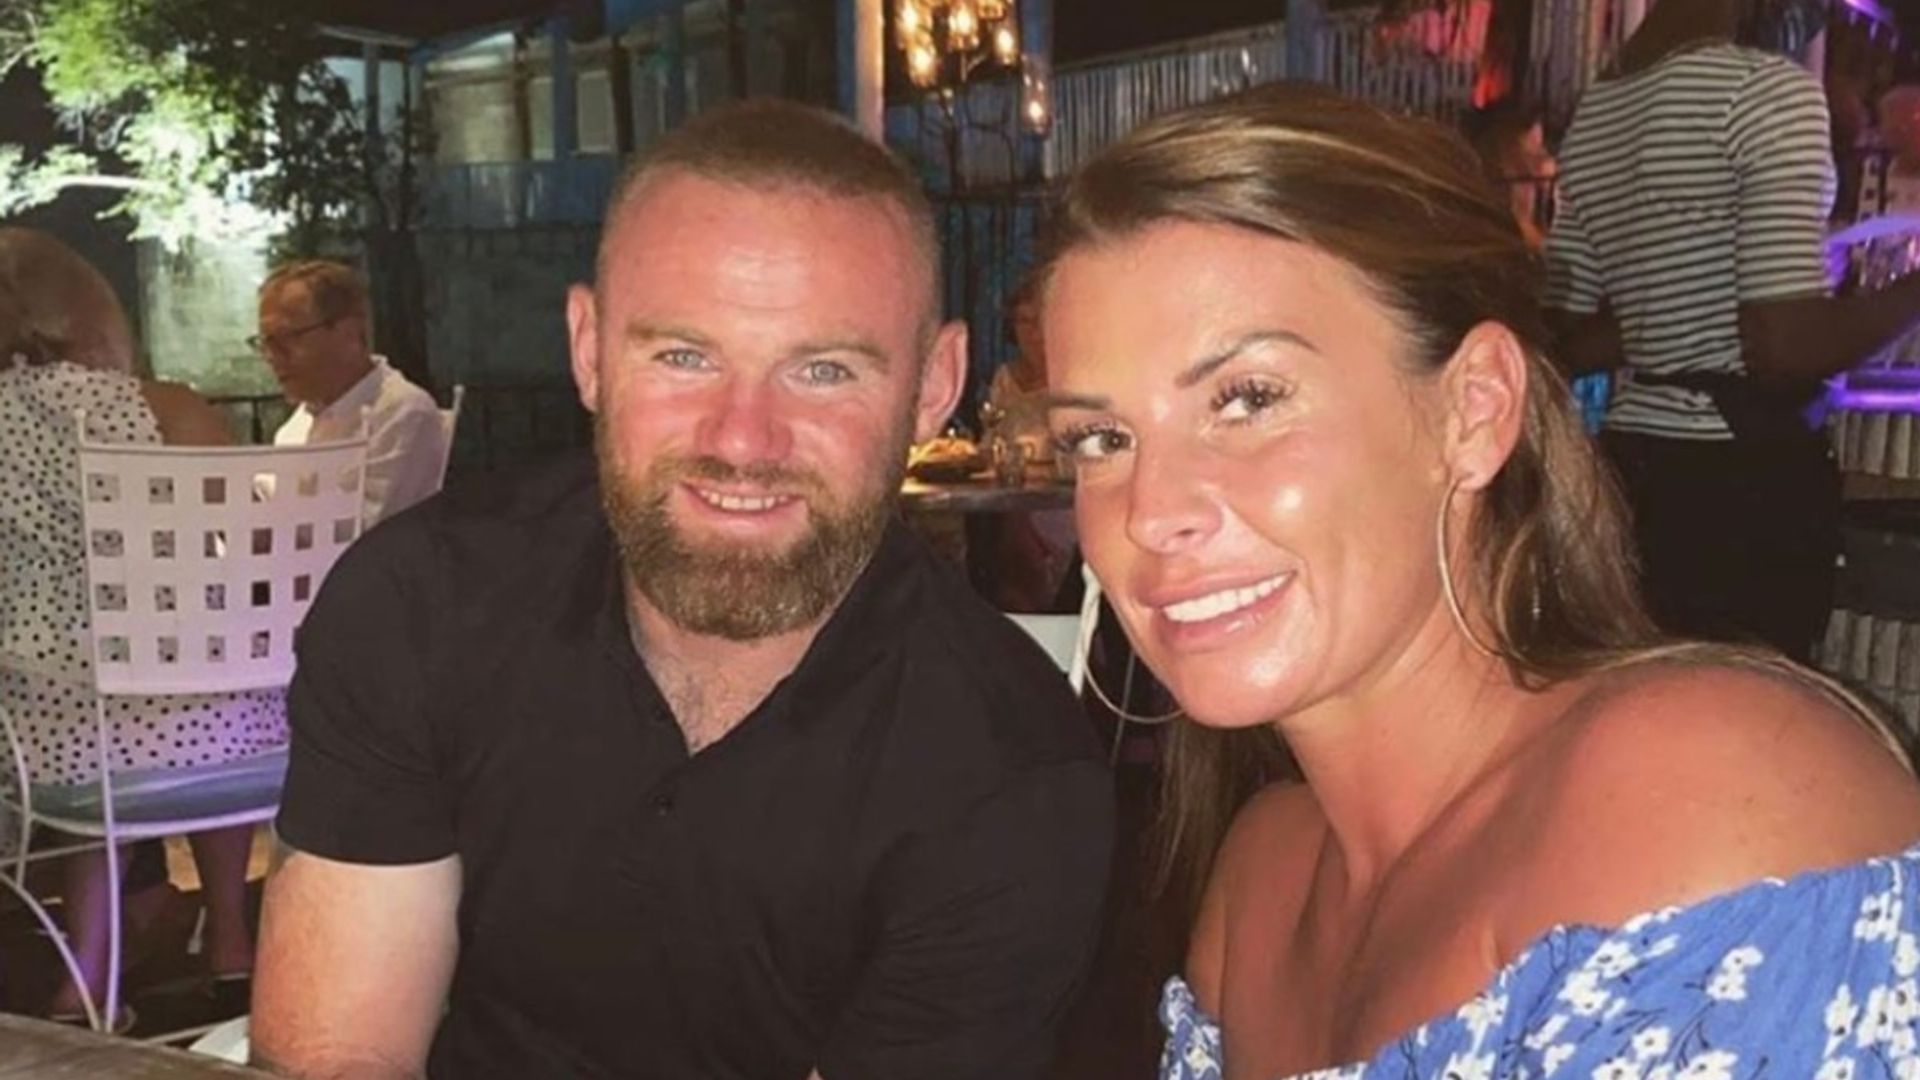 Coleen Rooney Shares Rare Photo With Wayne Rooney During Lockdown Holiday Hello